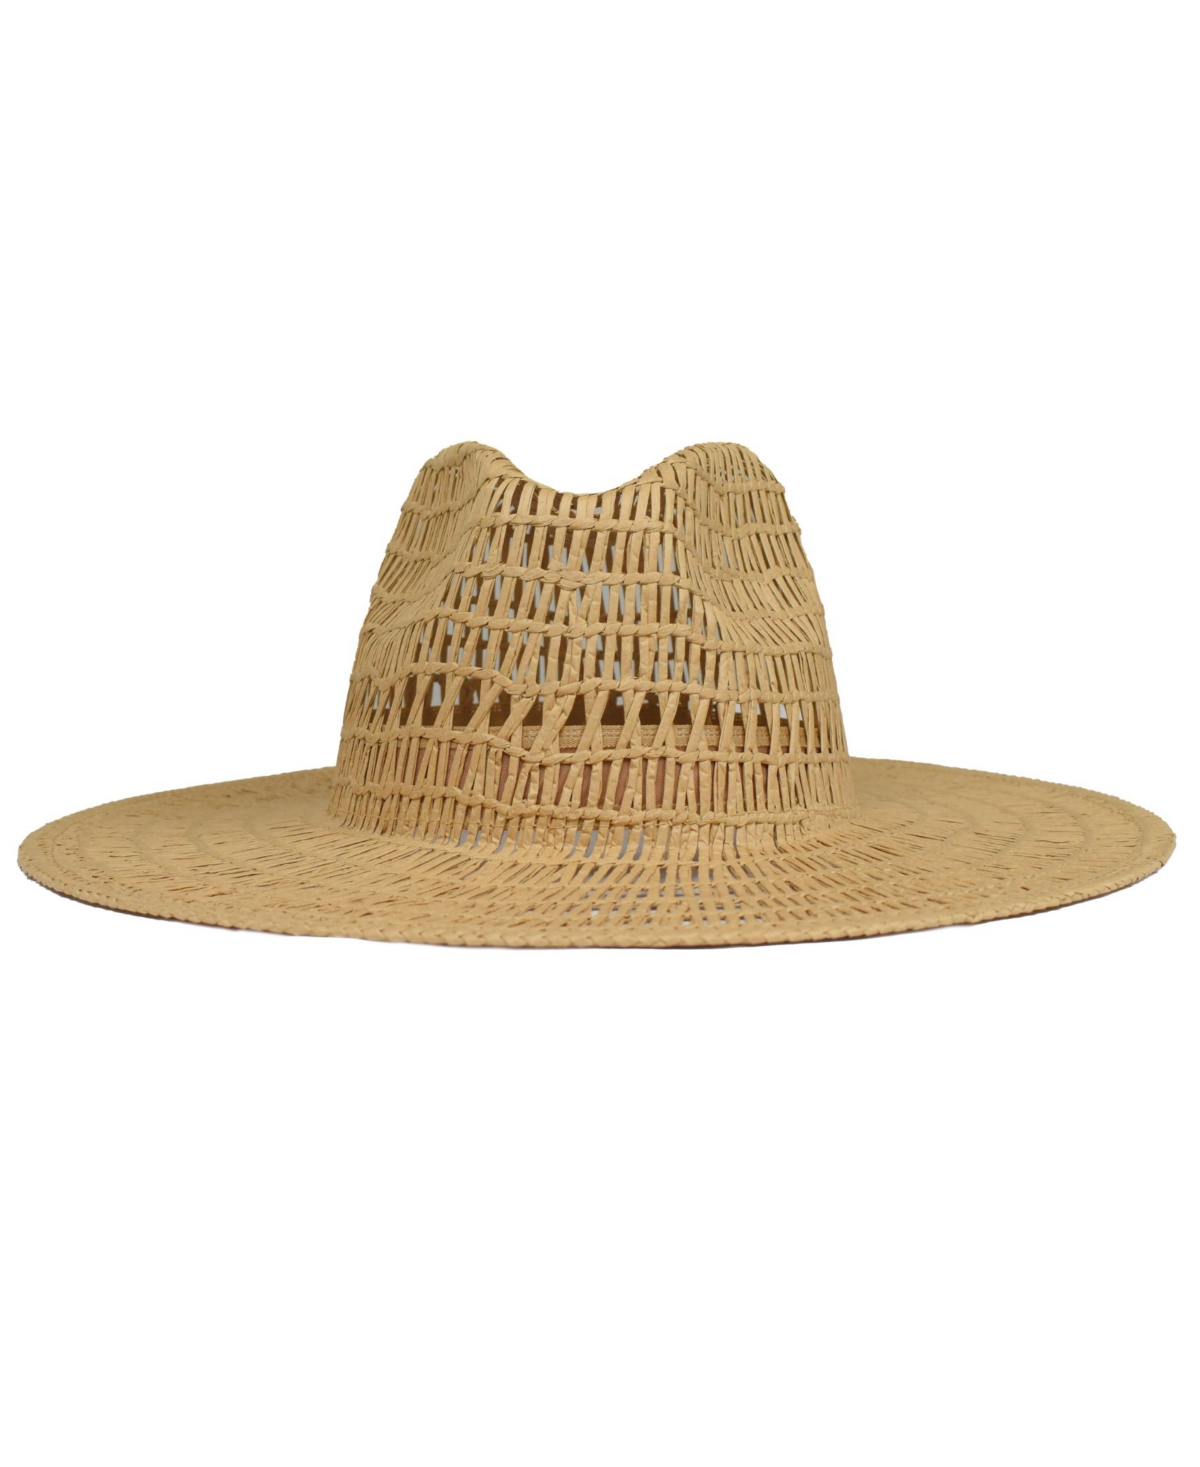 Marcus Adler Women's Straw Hat With Cut Out Detail In Natural